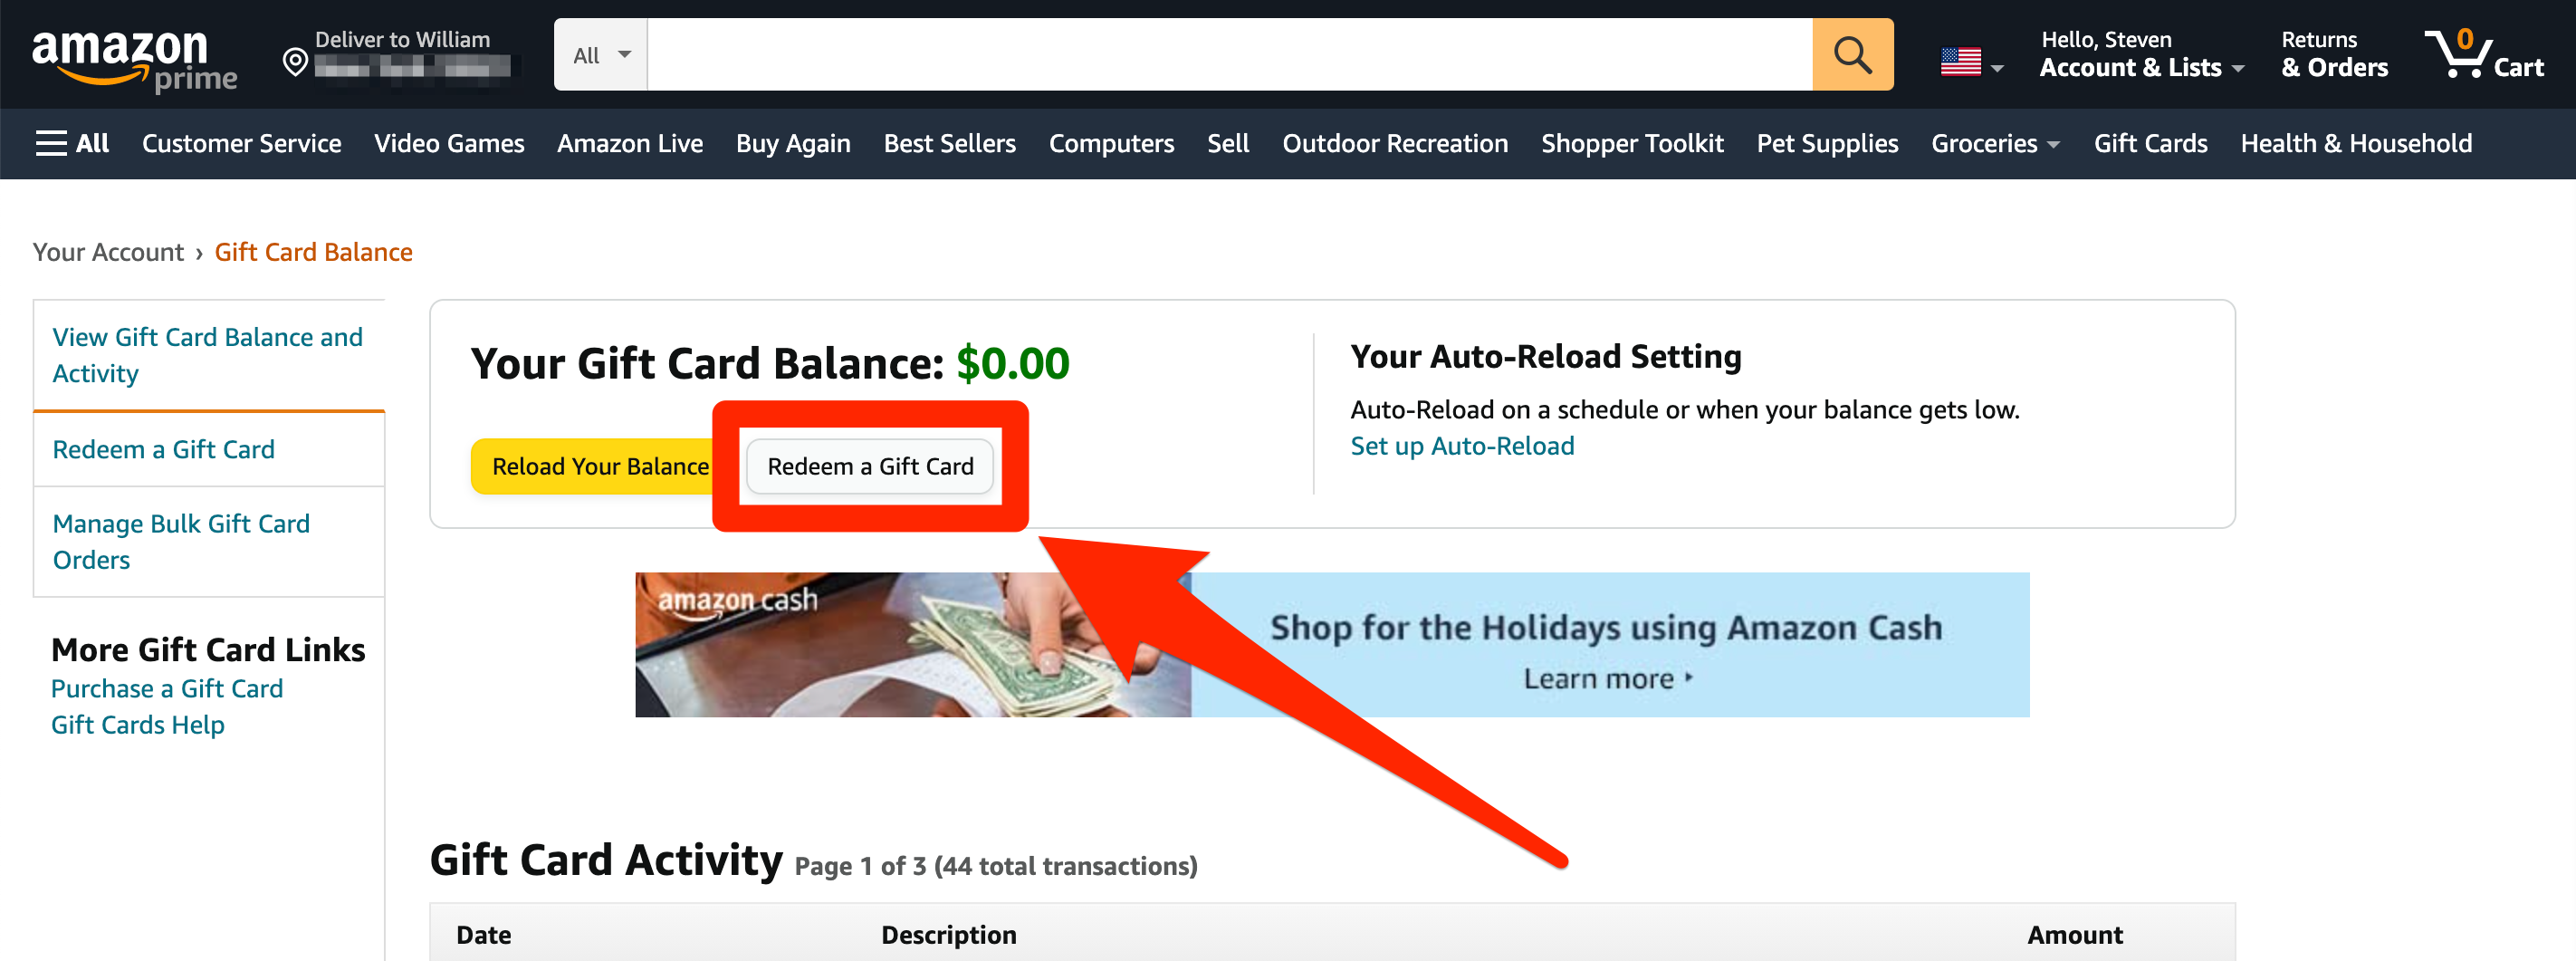 The Gift Card Balance page on the Amazon website.